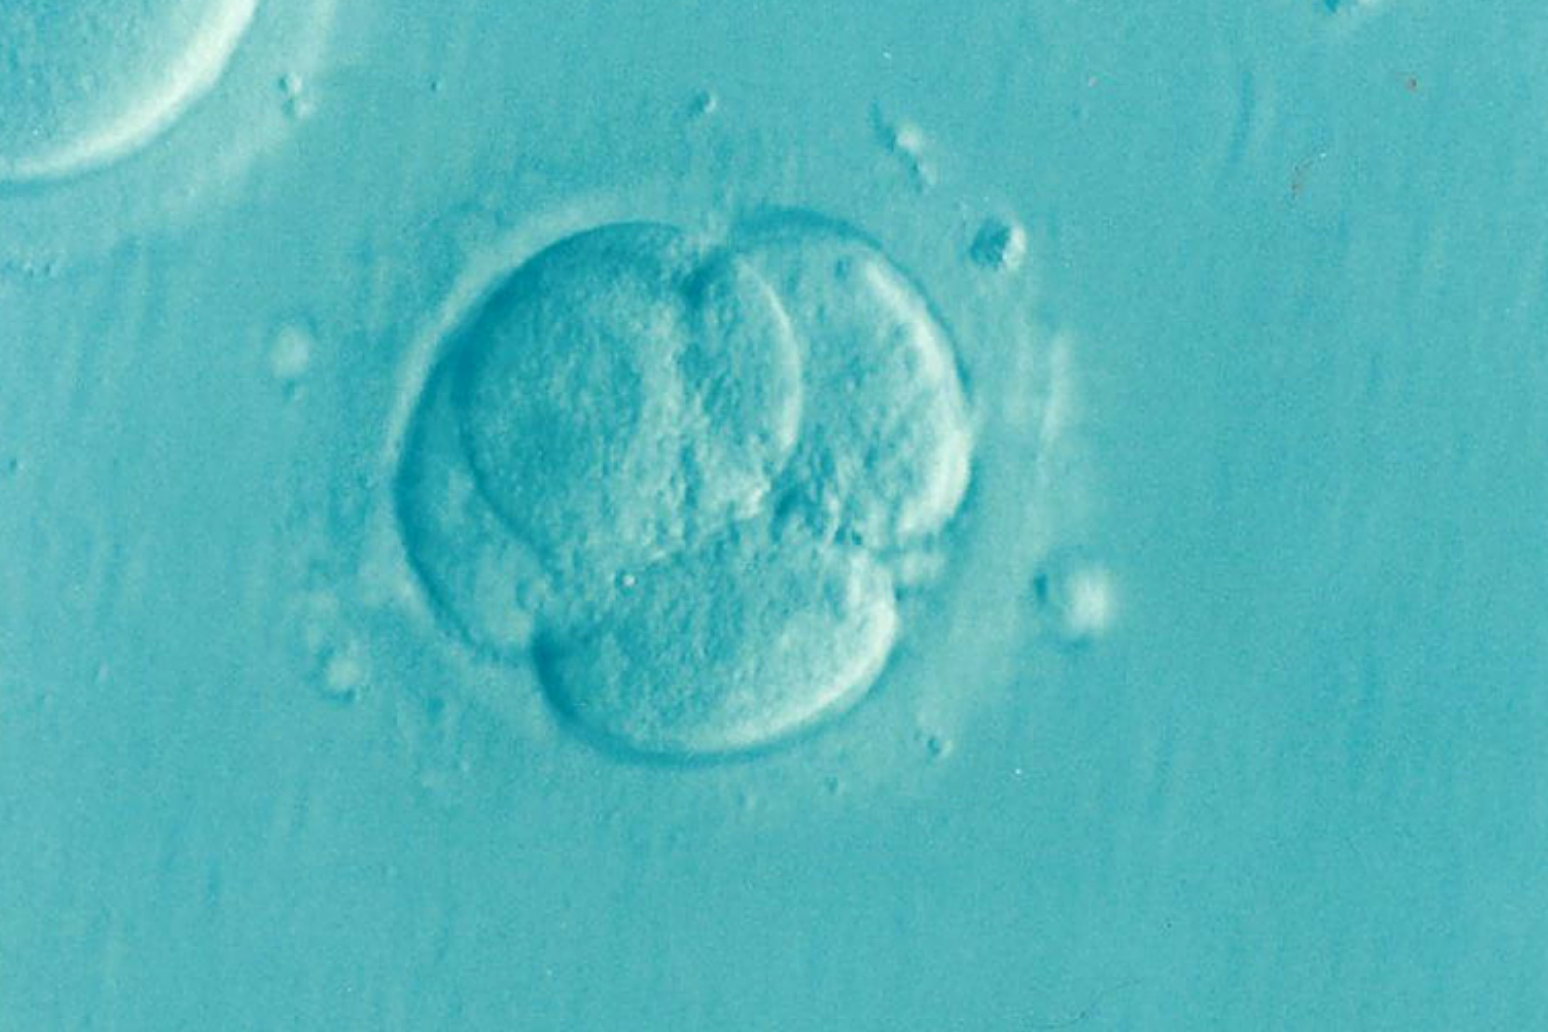 Human egg cells grown from earliest stage to maturity in laboratory 